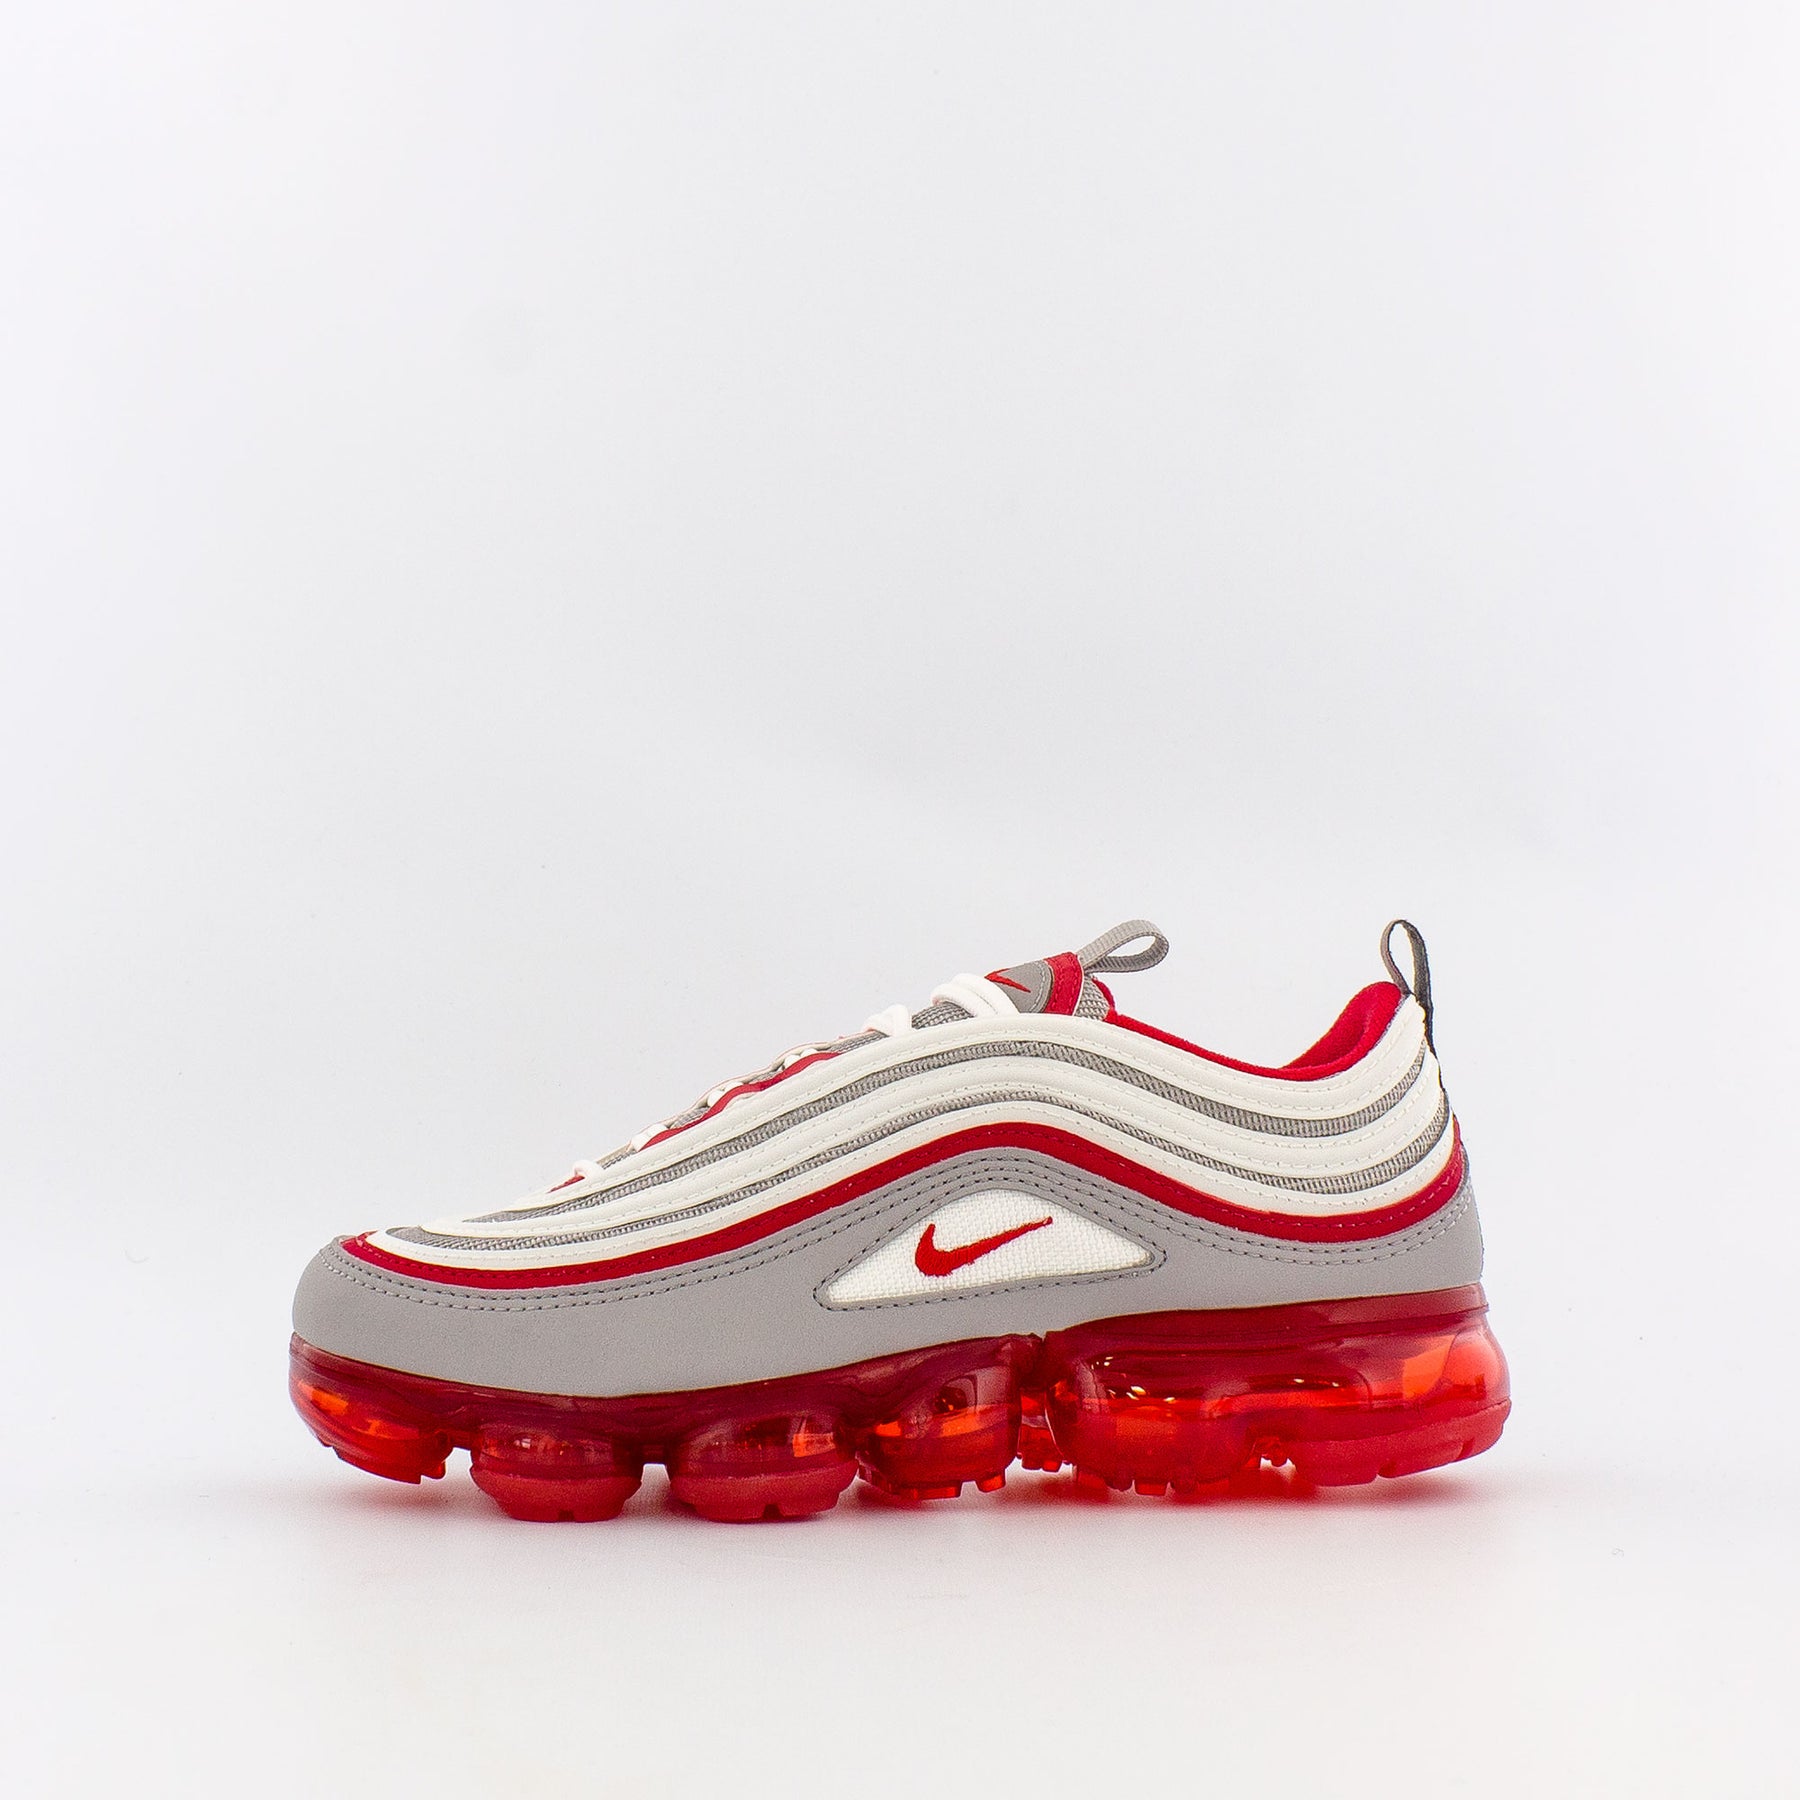 vapormax 97 red and white